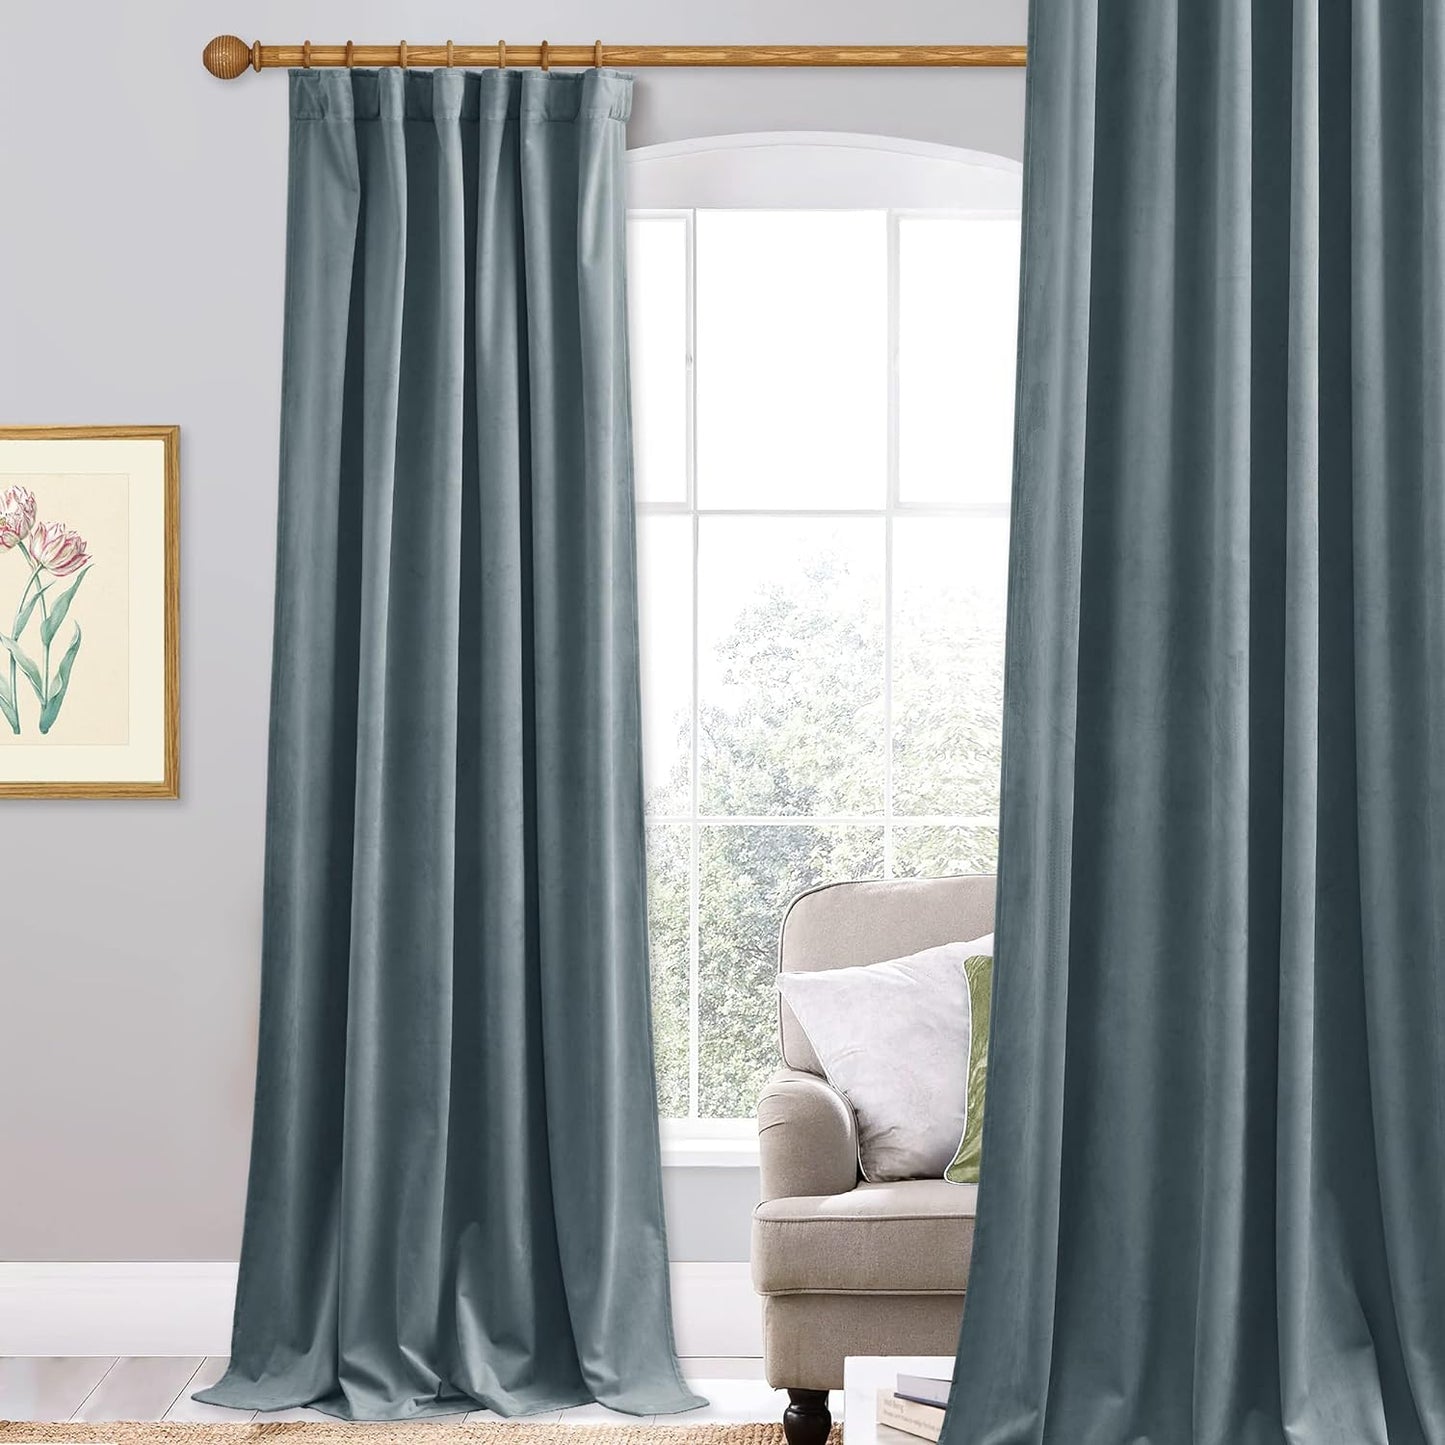 Stangh Navy Blue Velvet Curtains 96 Inches Long for Living Room, Luxury Blackout Sliding Door Curtains Thermal Insulated Window Drapes for Bedroom, W52 X L96 Inches, 1 Panel  StangH Stone Blue W52 X L108 